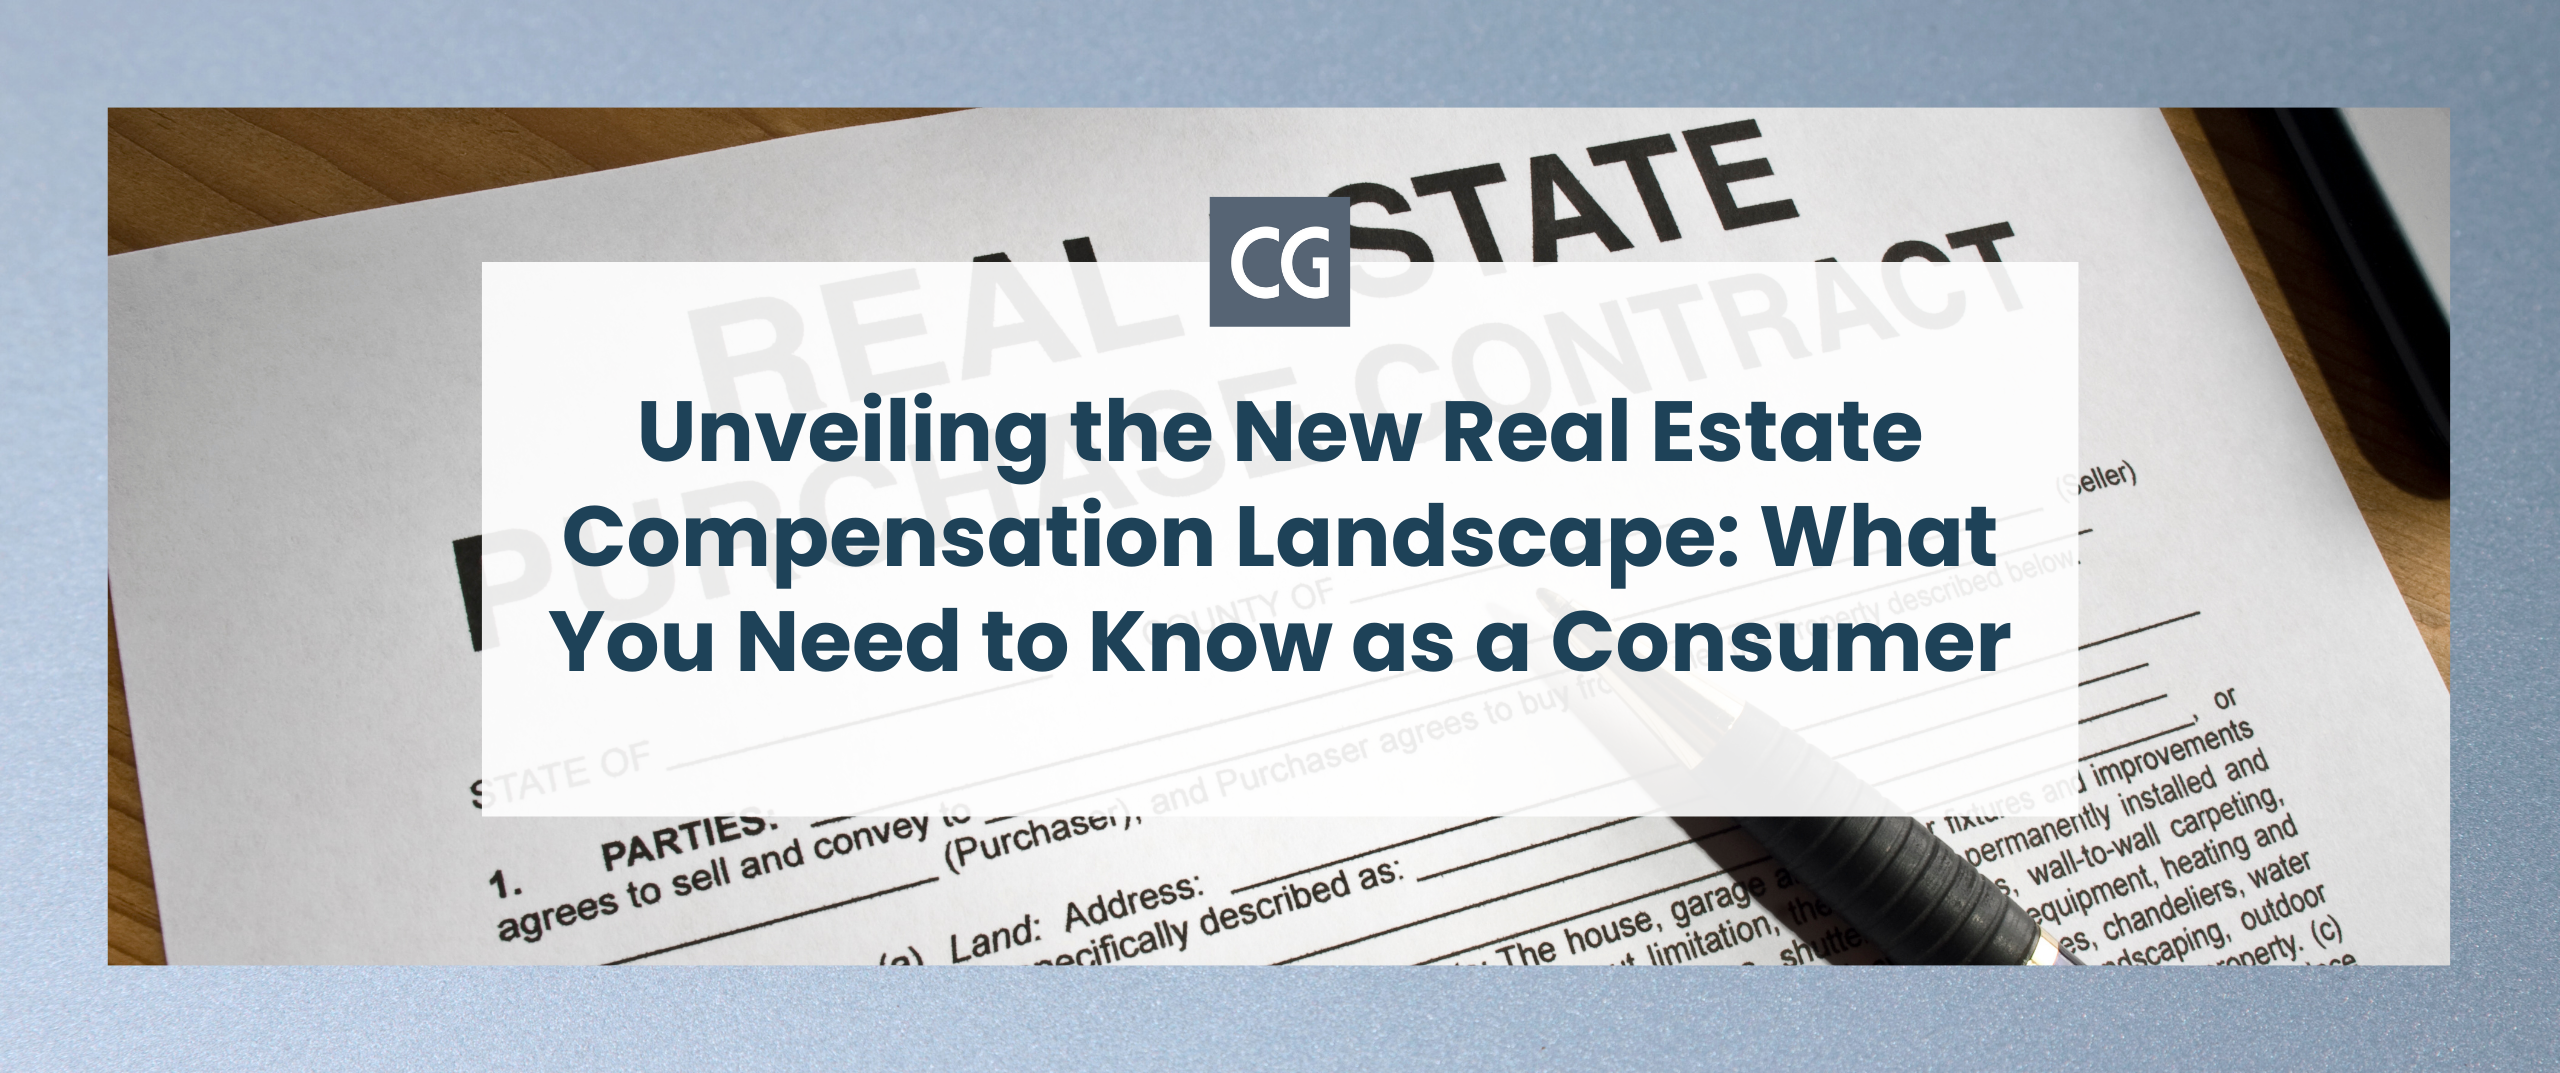 Unveiling the New Real Estate Compensation Landscape: What You Need to Know as a Consumer